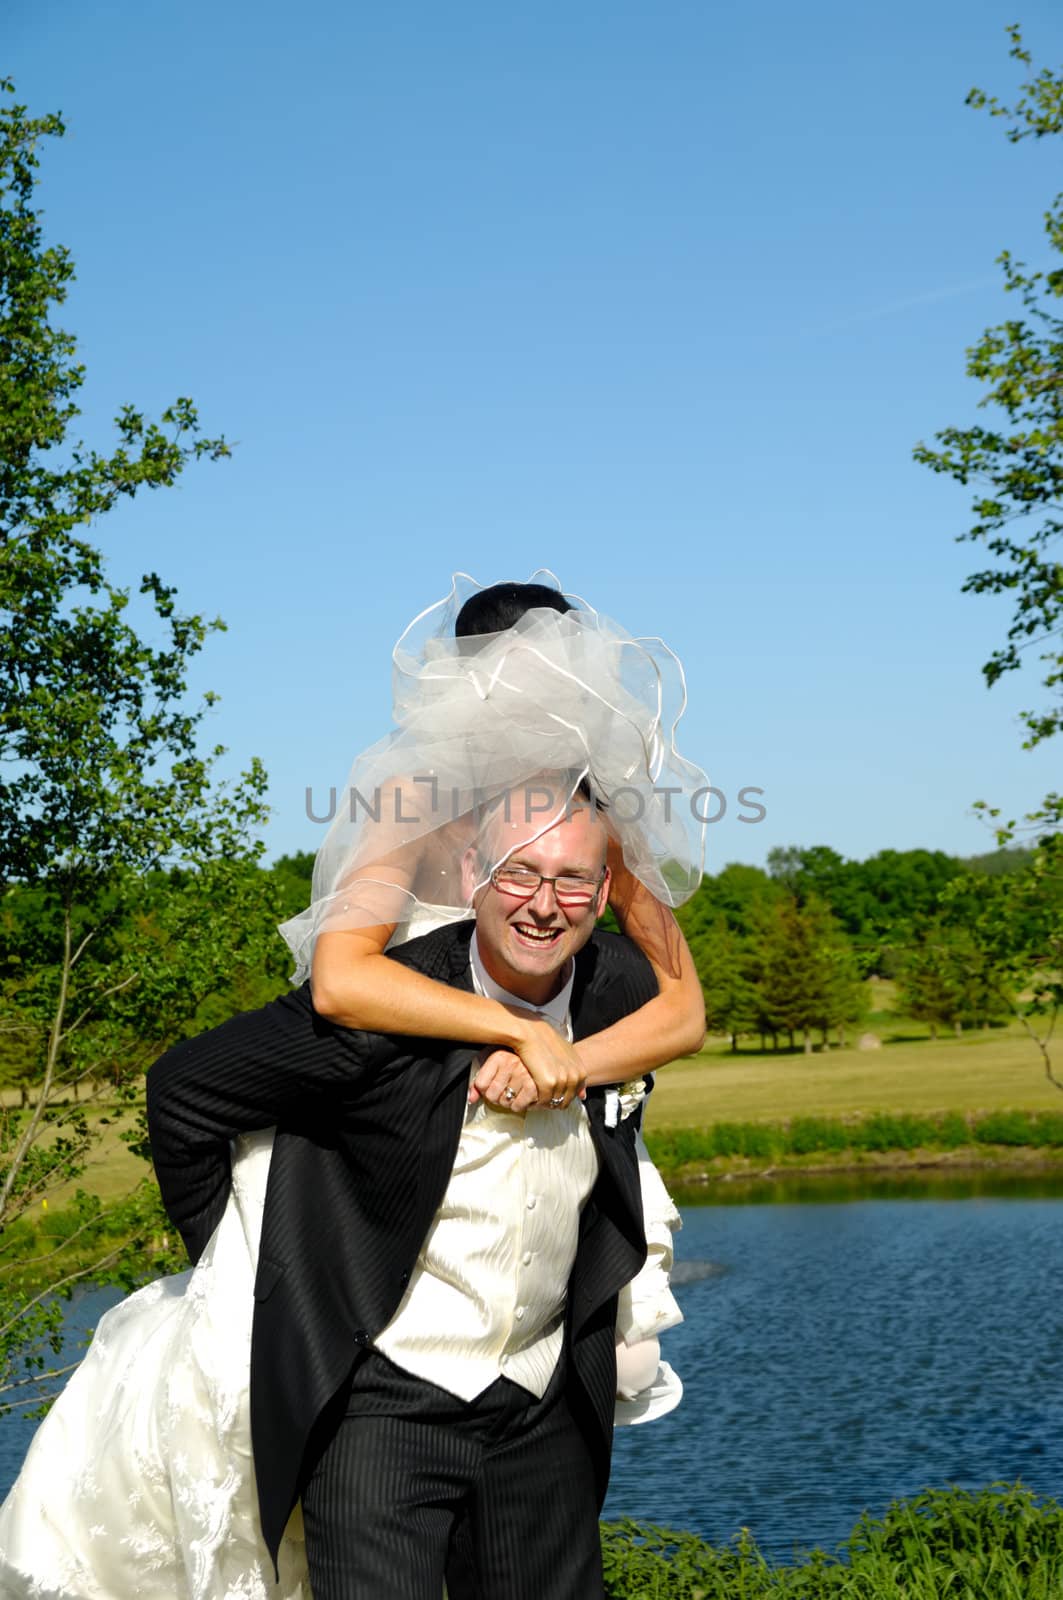 Groom is lifting his bride up in a park.